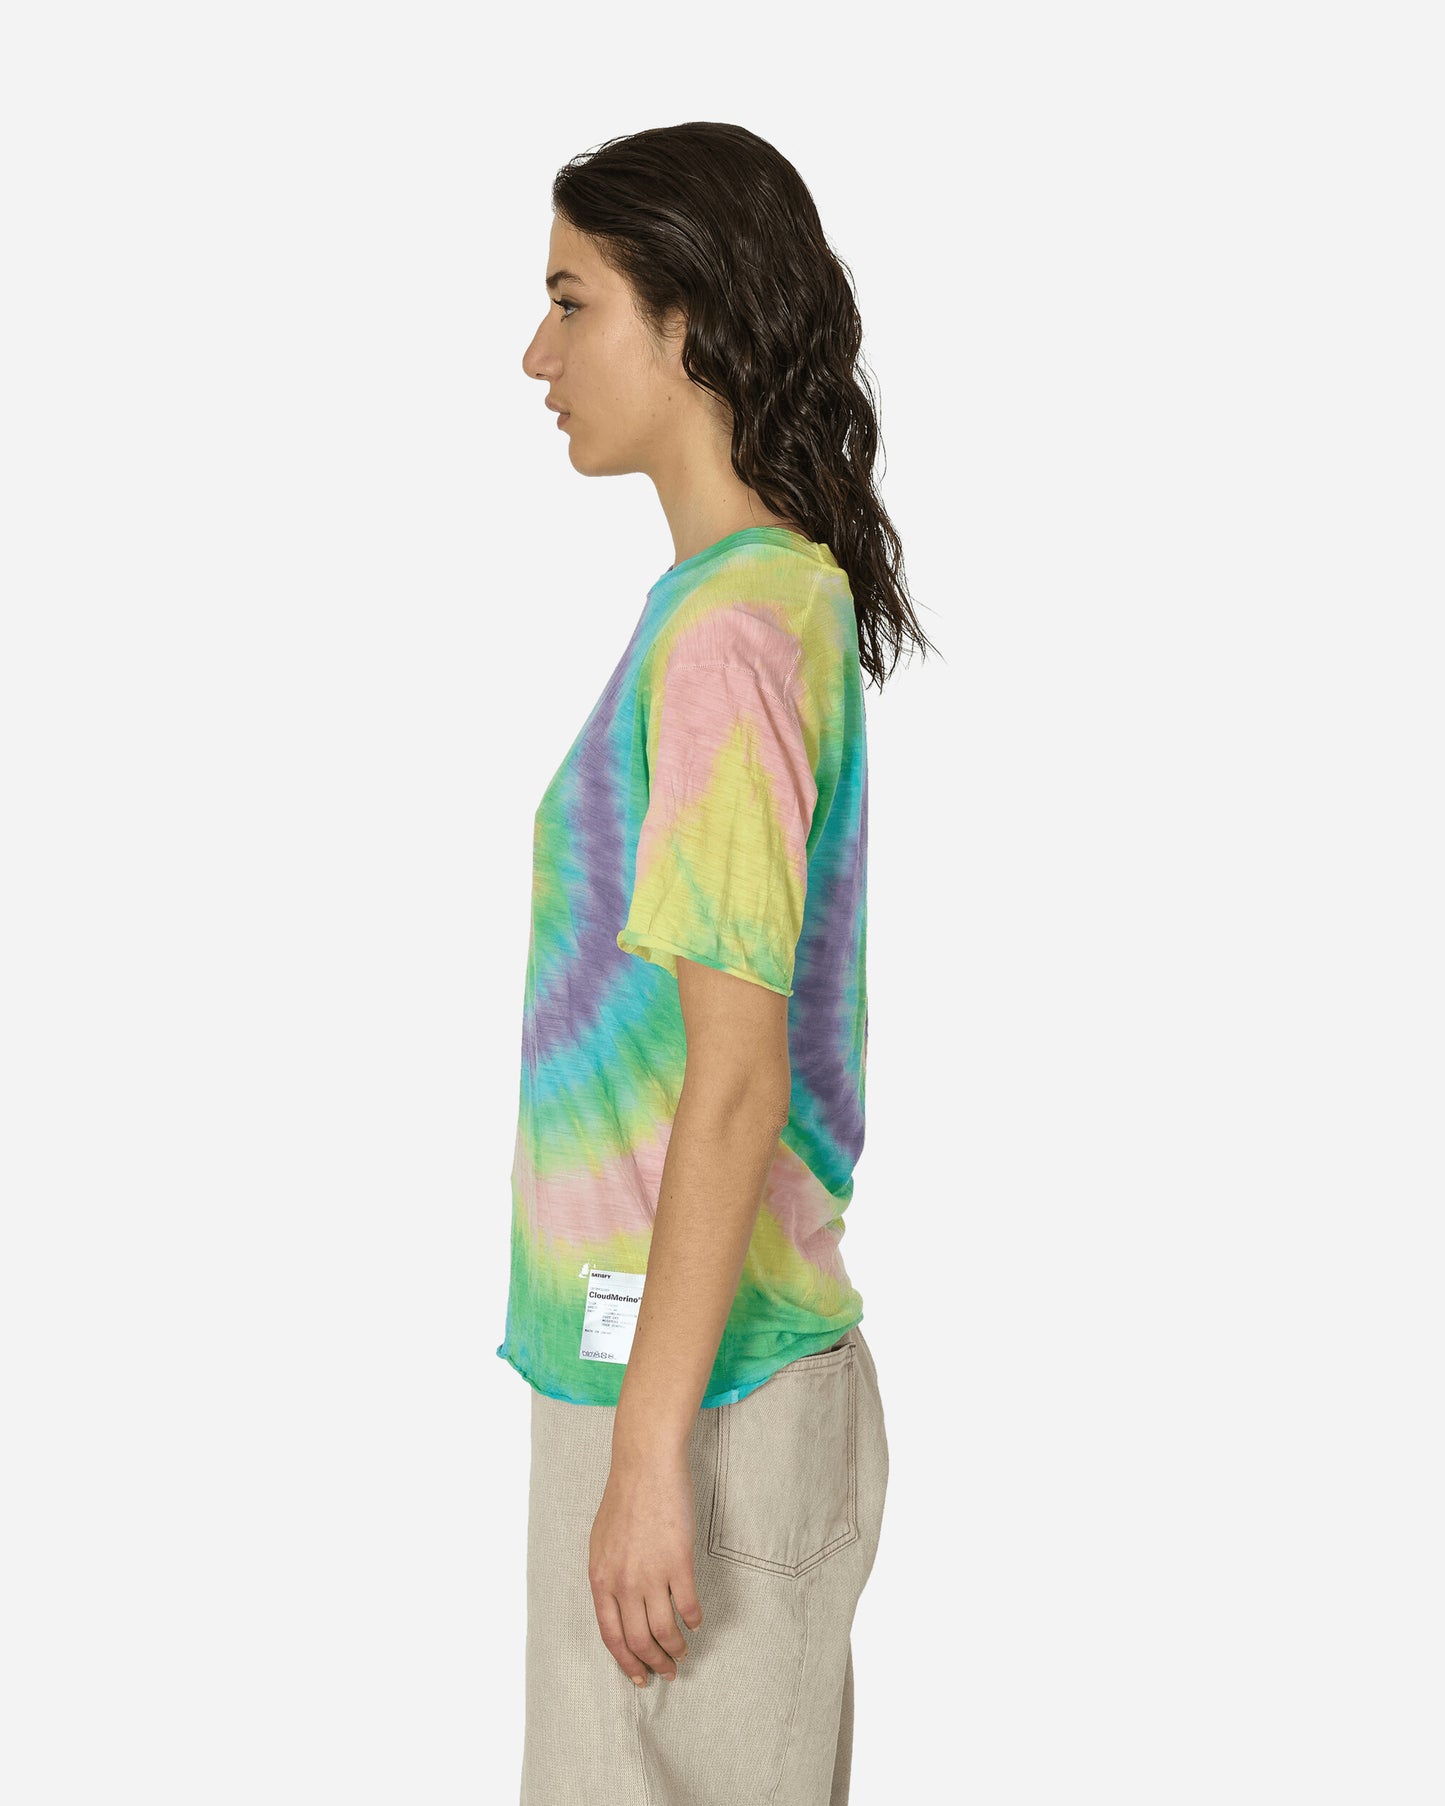 Satisfy Cloudmerino T-Shirt Tie-Dye Psychedelic T-Shirts Shortsleeve 5088 TDPS-CO